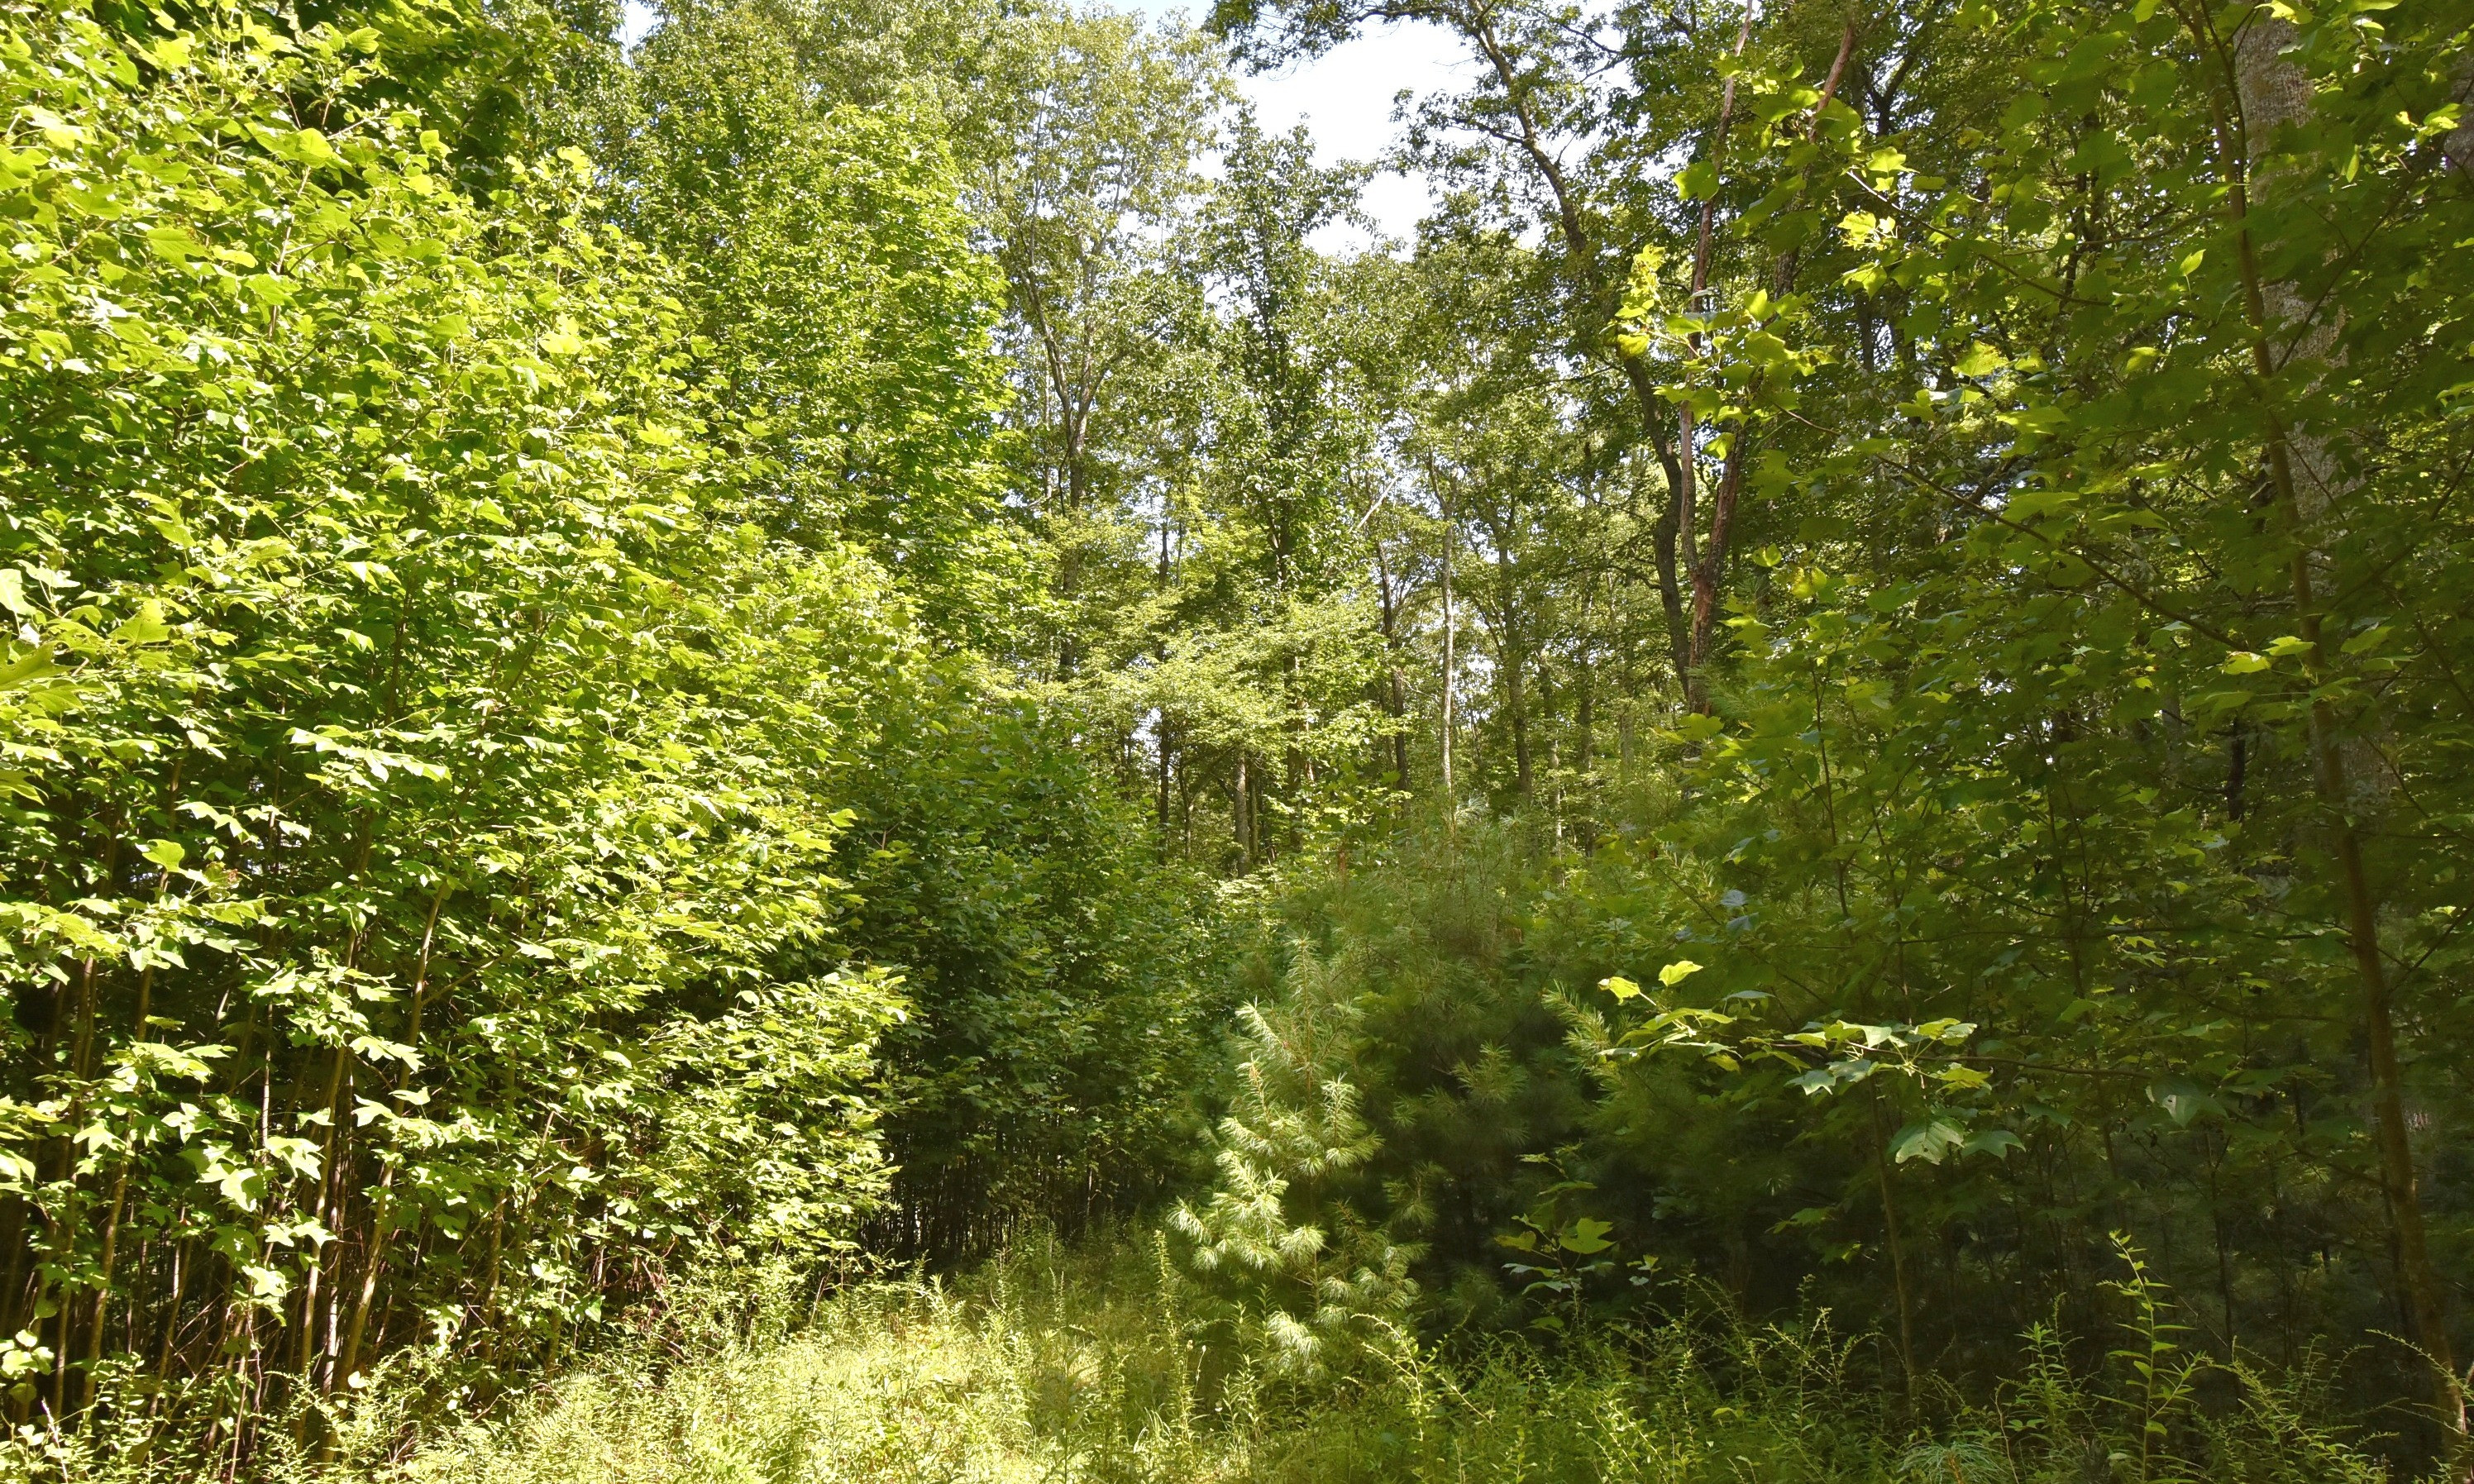 Looking for a private unrestricted tract to construct your mountain cabin retreat or hunting cabin? Take a look at this 25.66 acre wooded tract in the Creston area of Ashe County.